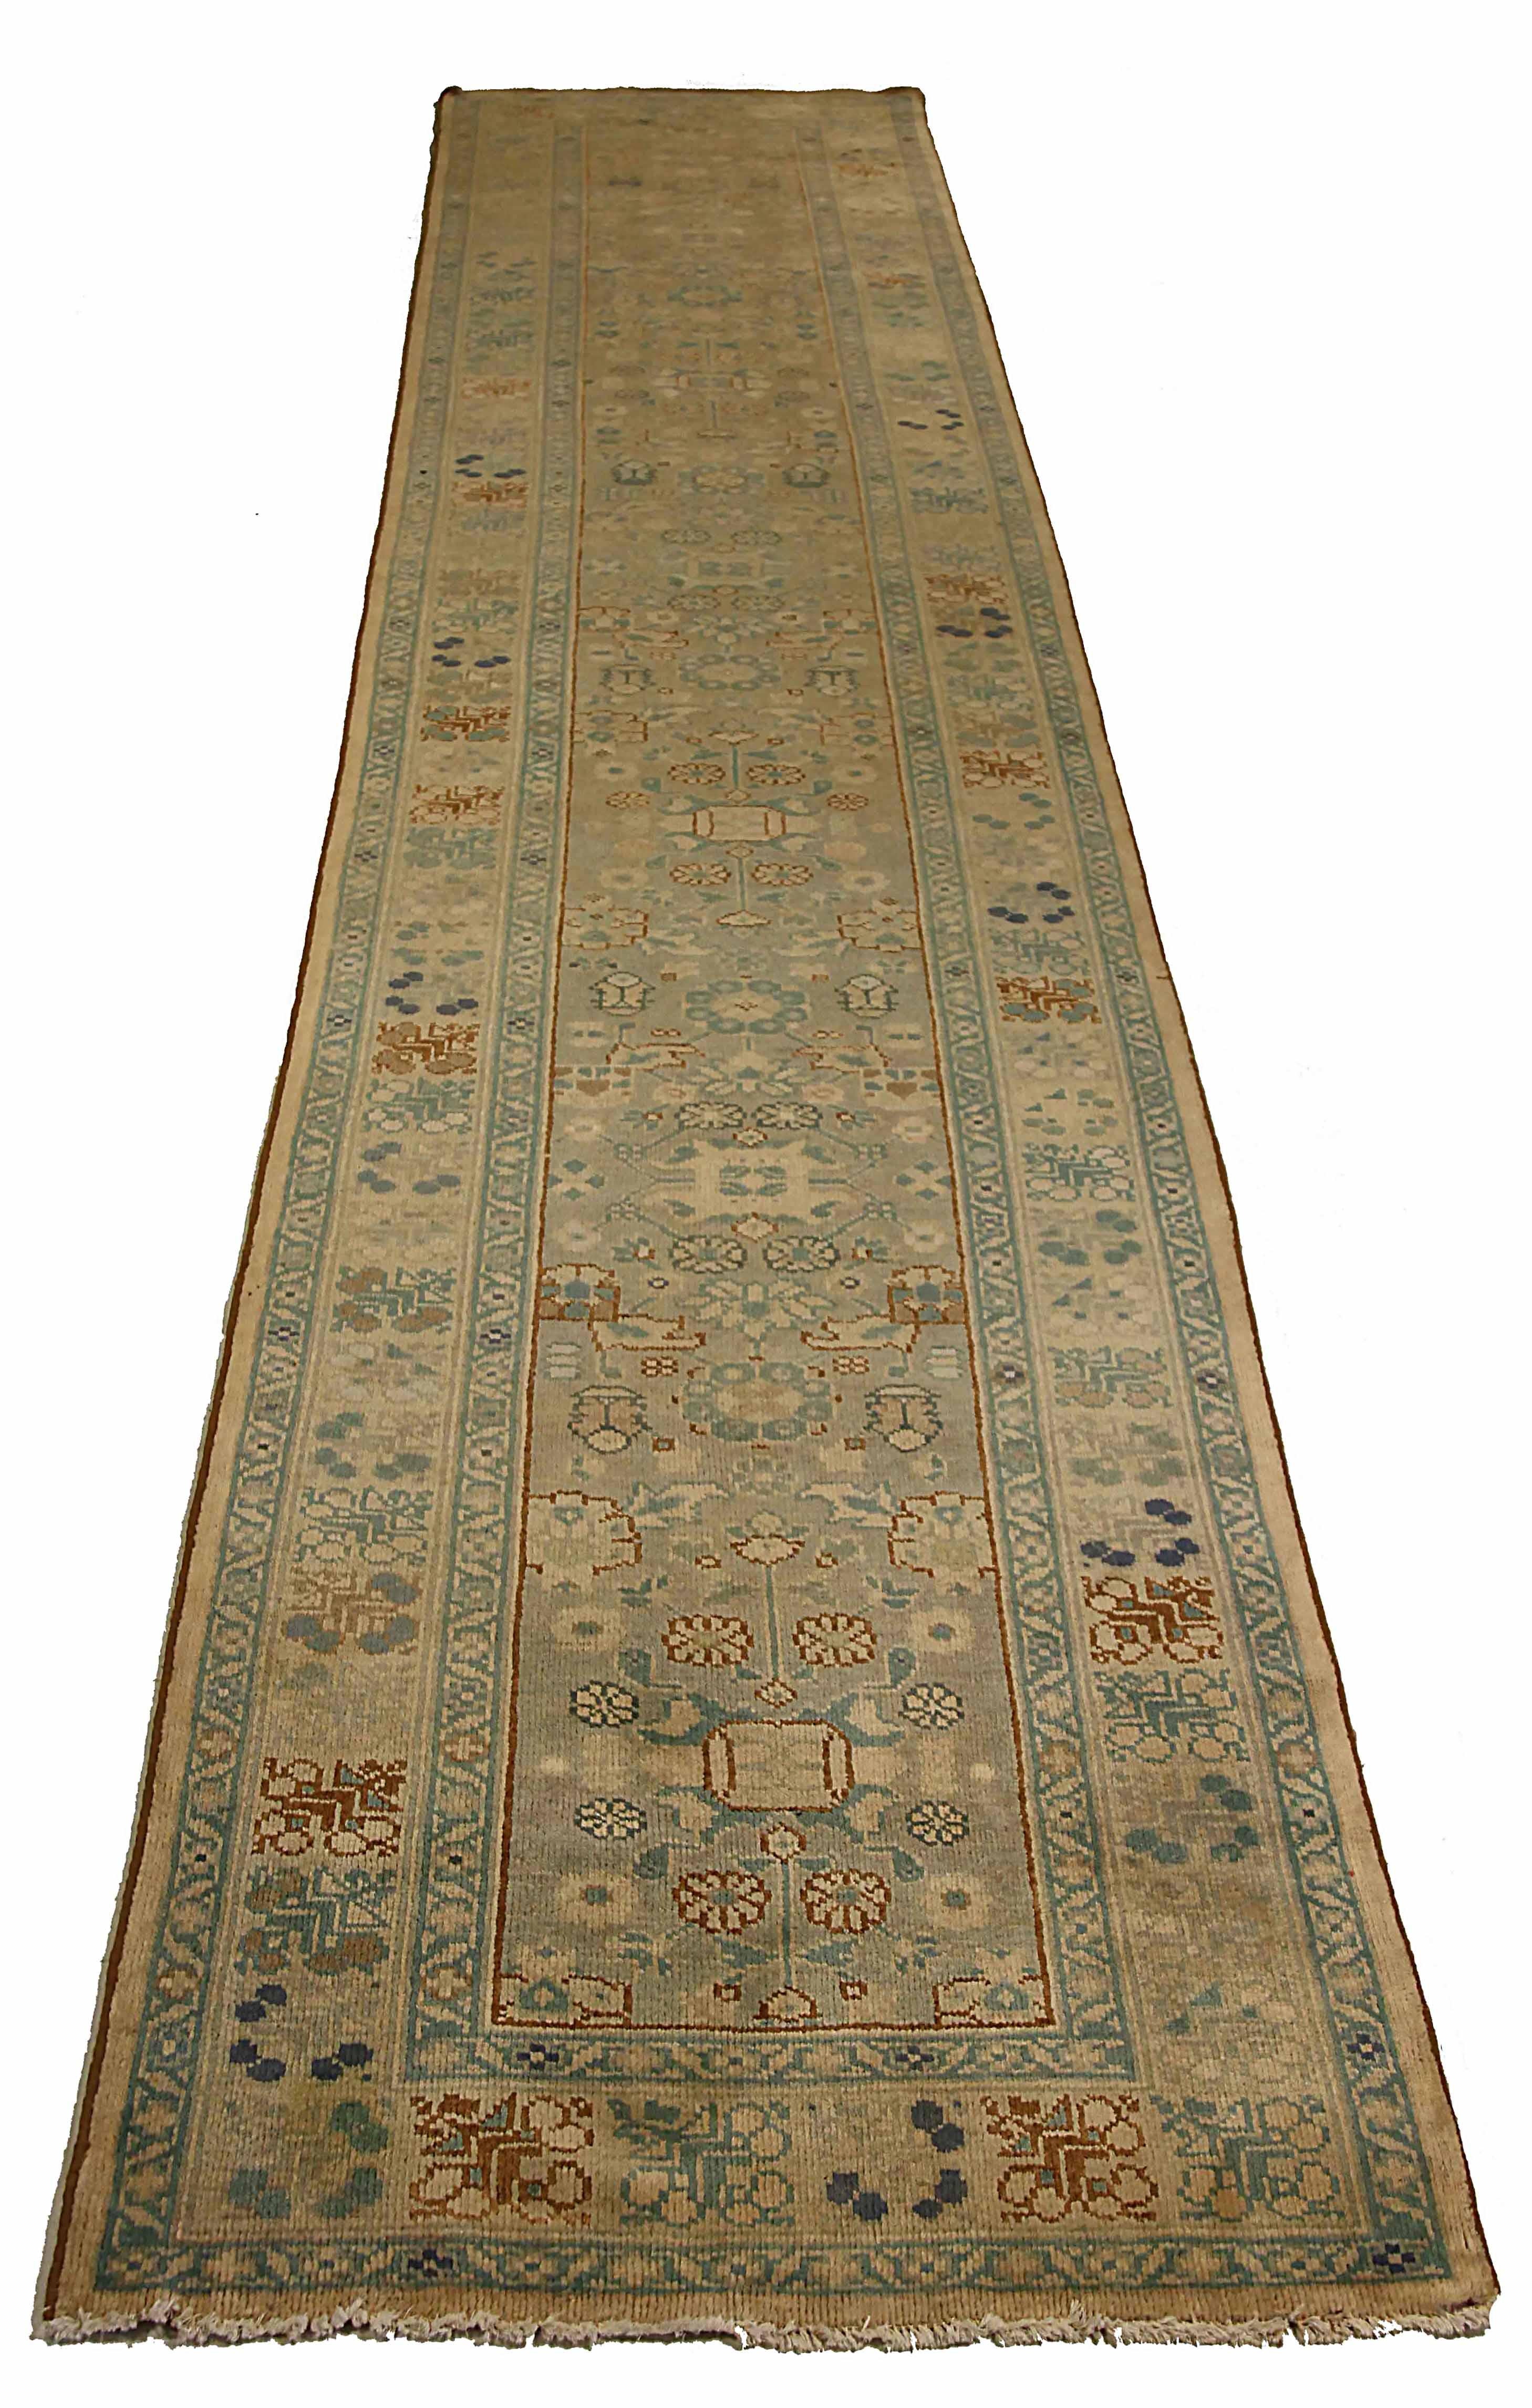 Antique Persian runner rug handwoven from the finest sheep’s wool. It’s colored with all-natural vegetable dyes that are safe for humans and pets. It’s a traditional Sultanabad design handwoven by expert artisans. It’s a lovely runner rug that can